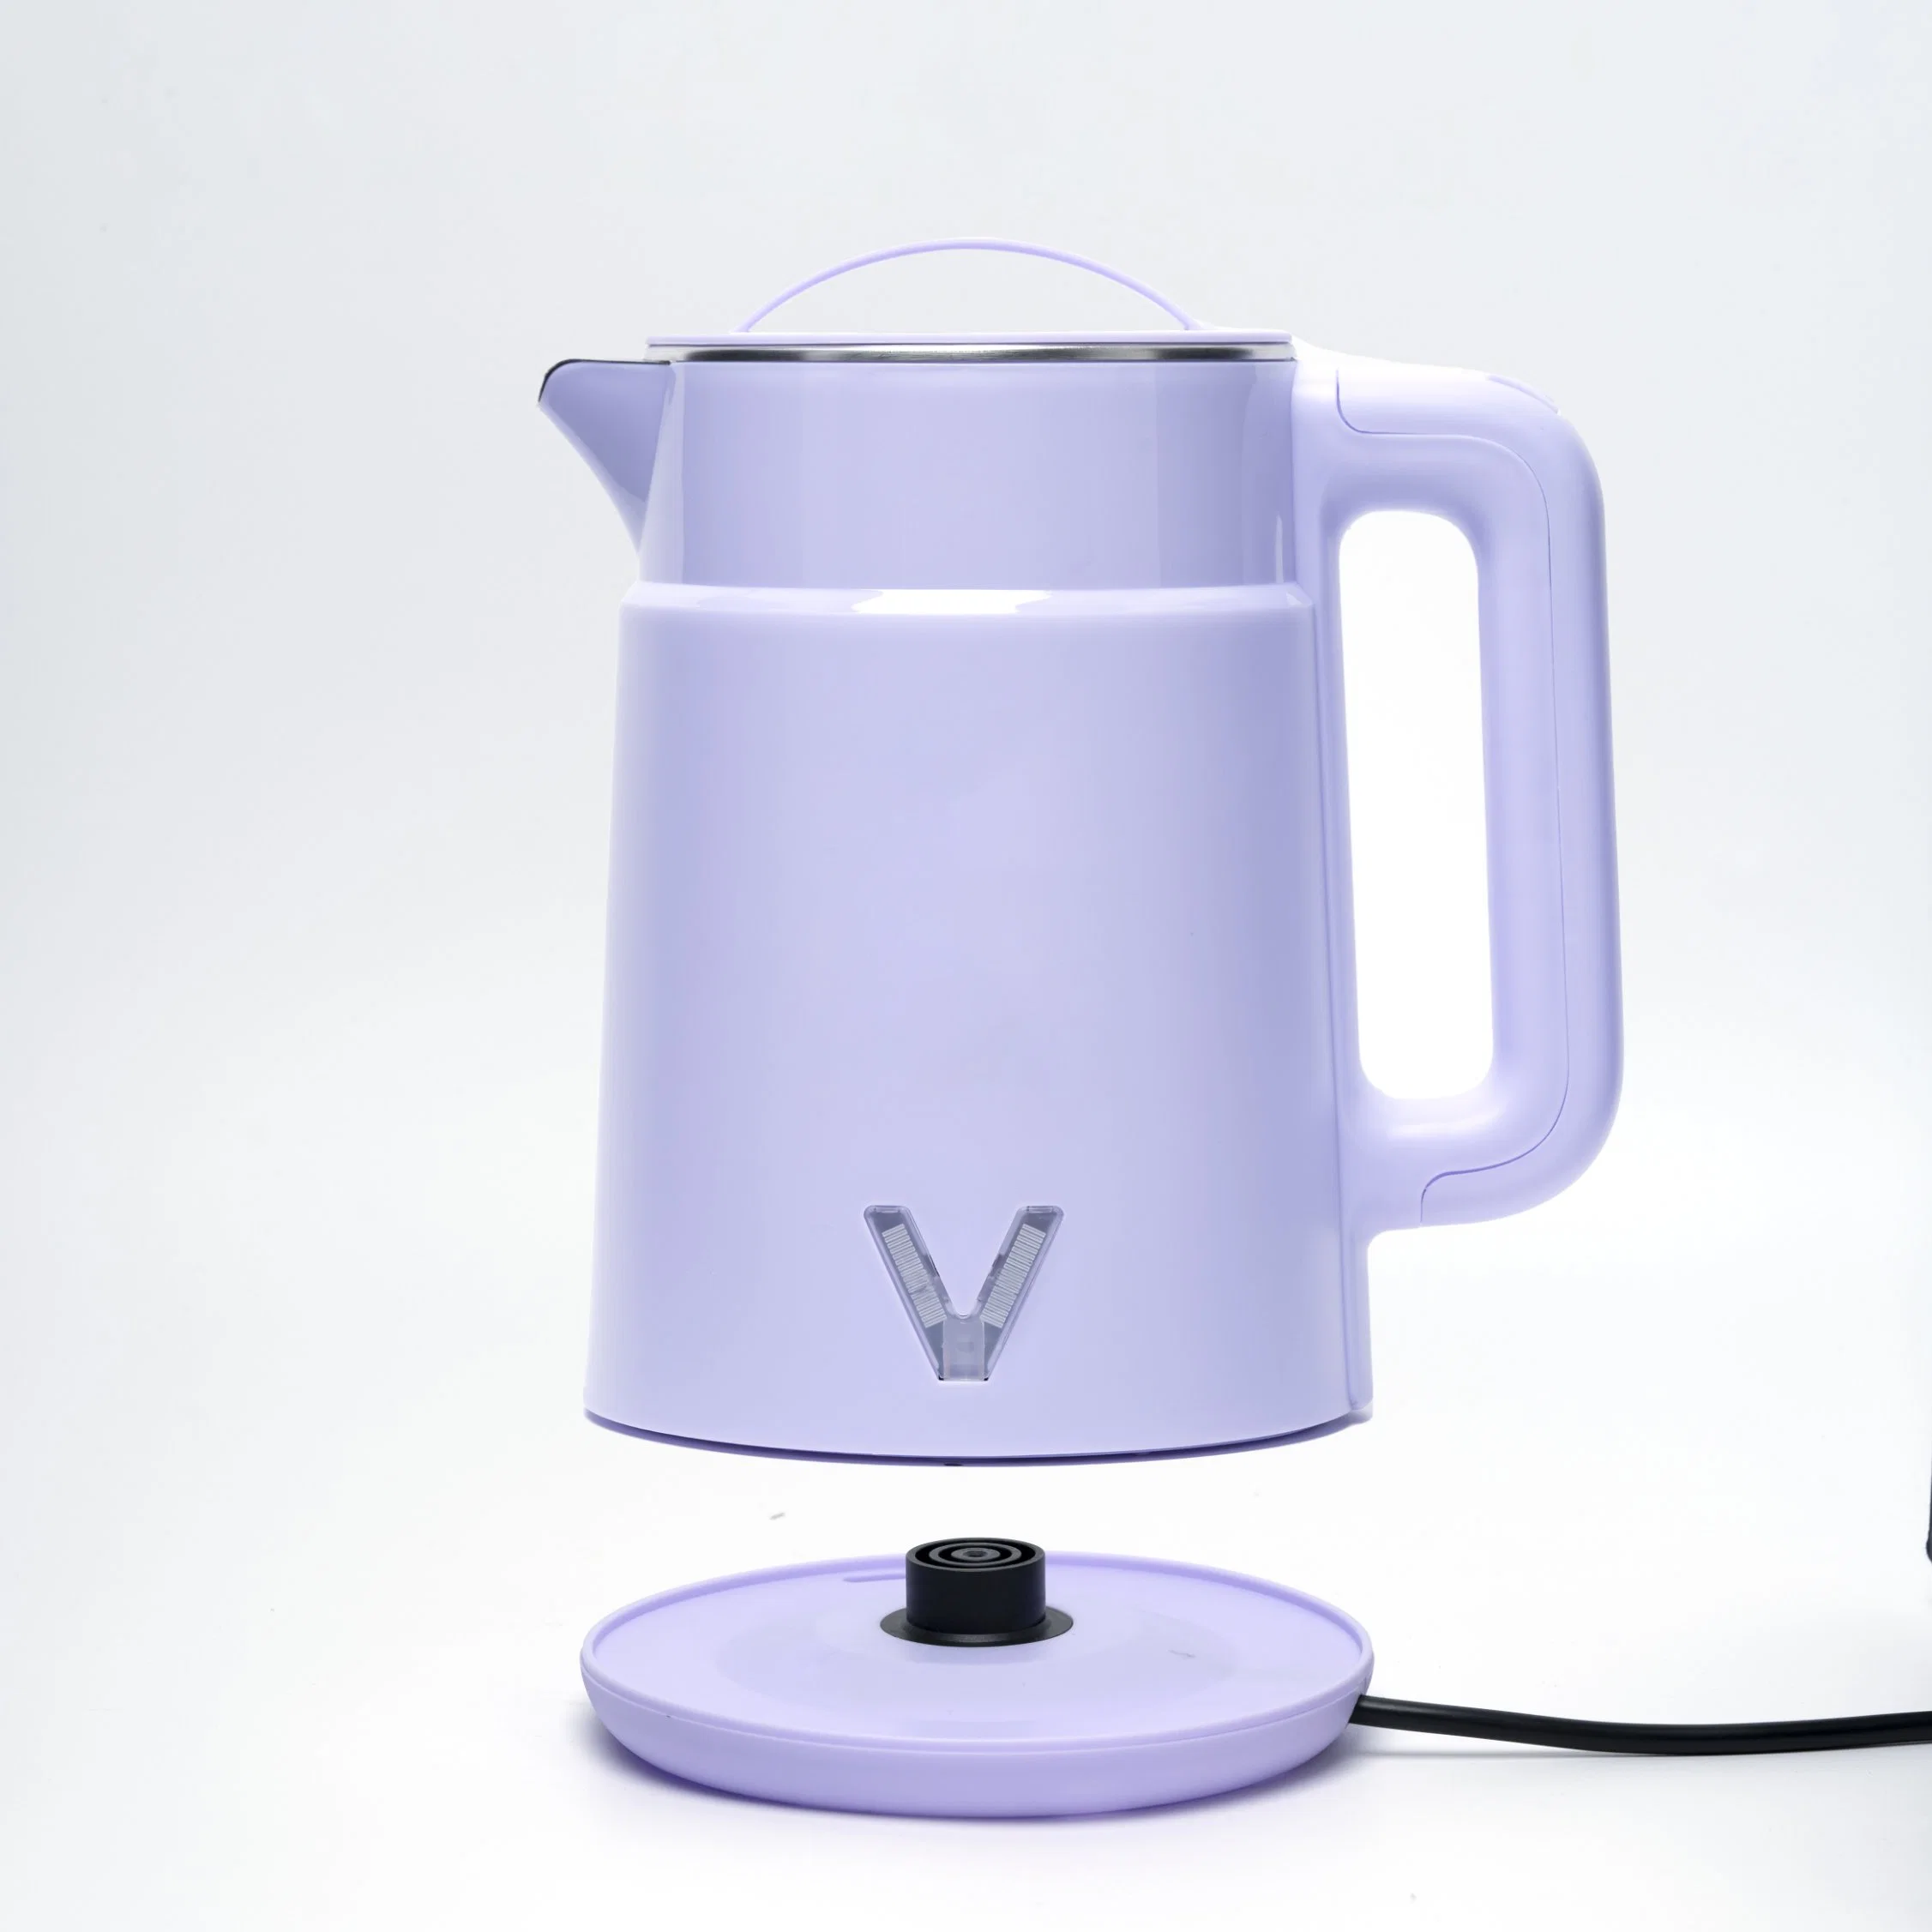 2023 New Arrival Doble Wall Kettle 1.8L Home Appliances 201/304 Ss Household Electric Manufacturers